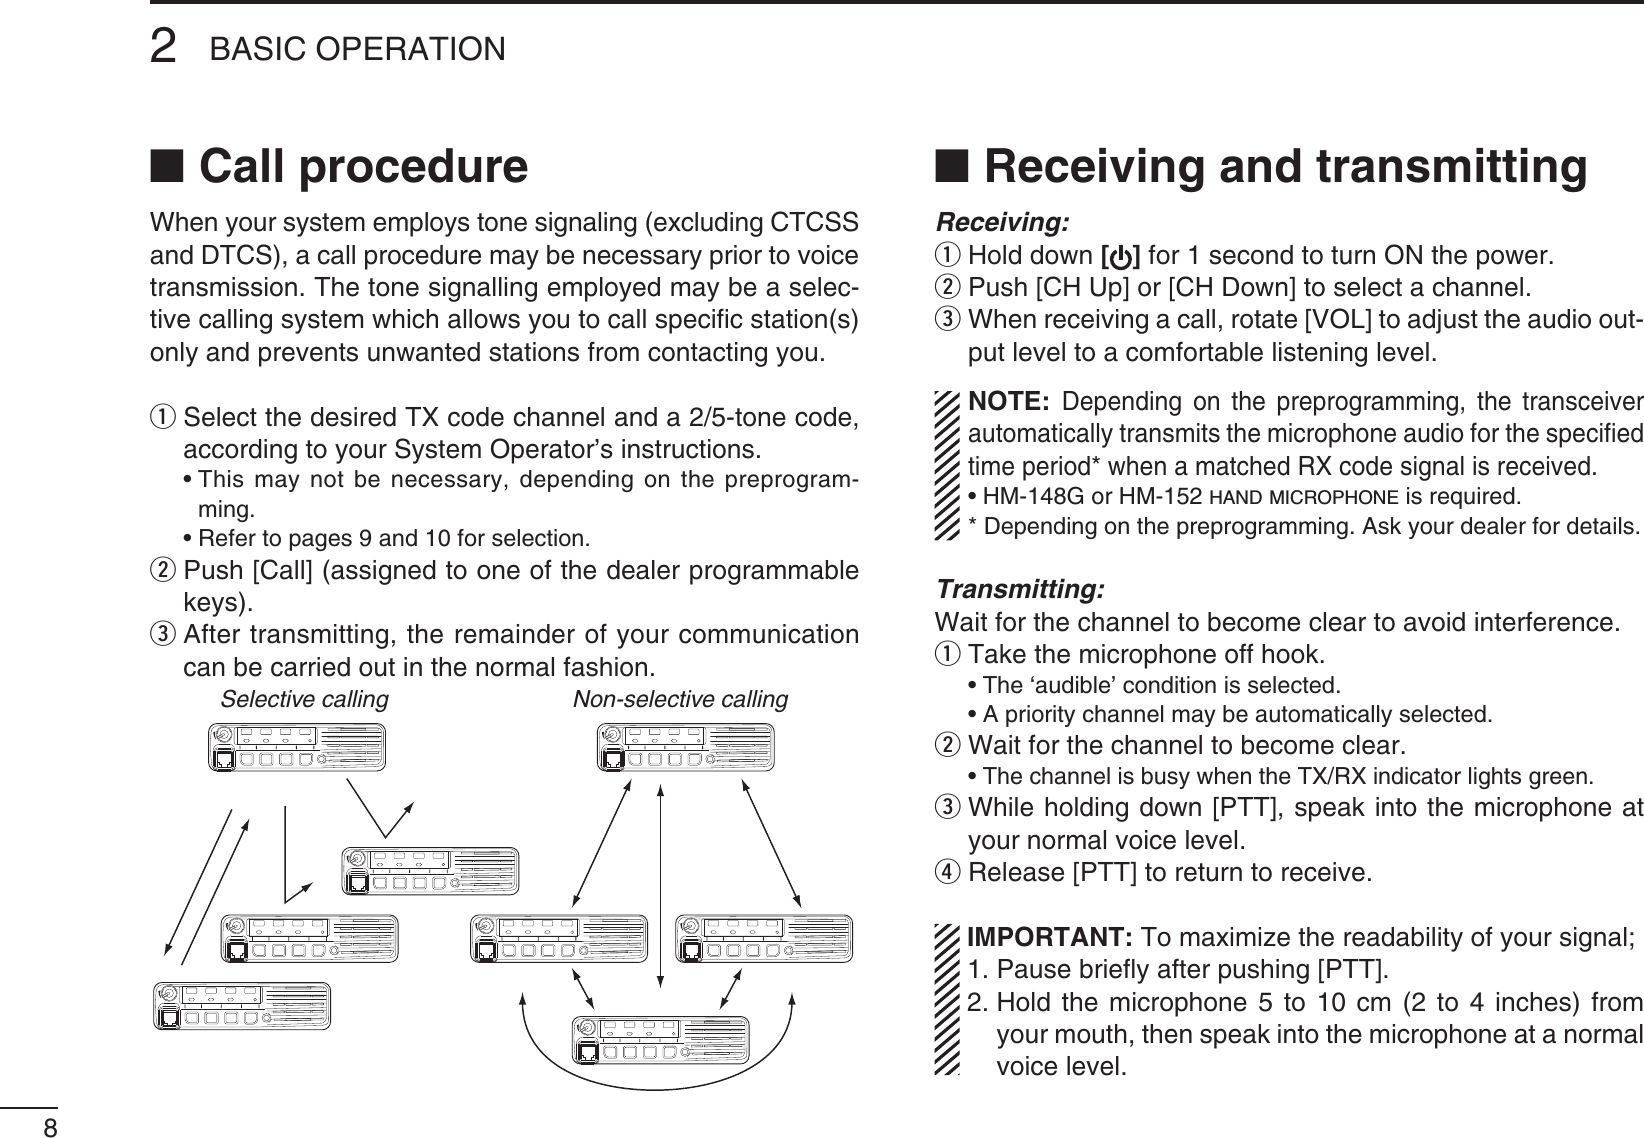 82BASIC OPERATIONN Call procedure7HENYOURSYSTEMEMPLOYSTONESIGNALINGEXCLUDING#4#33and DTCS), a call procedure may be necessary prior to voice transmission. The tone signalling employed may be a selec-tive calling system which allows you to call speciﬁc station(s) only and prevents unwanted stations from contacting you.q3ELECTTHEDESIRED48CODECHANNELANDATONECODEaccording to your System Operator’s instructions. s4HISMAY NOT BENECESSARY DEPENDINGON THEPREPROGRAM-ming. s2EFERTOPAGESANDFORSELECTIONw  Push [Call] (assigned to one of the dealer programmable keys).e  After transmitting, the remainder of your communication can be carried out in the normal fashion.Selective calling Non-selective callingN Receiving and transmittingReceiving:q Hold down [] for 1 second to turn ON the power.w  Push [CH Up] or [CH Down] to select a channel.e  When receiving a call, rotate [VOL] to adjust the audio out-put level to a comfortable listening level../4%Depending on the preprogramming, the transceiver automatically transmits the microphone audio for the speciﬁed time period* when a matched RX code signal is received.s(-&apos;OR(-HAND MICROPHONE is required.* Depending on the preprogramming. Ask your dealer for details.Transmitting:Wait for the channel to become clear to avoid interference.q  Take the microphone off hook. s4HE@AUDIBLECONDITIONISSELECTED s!PRIORITYCHANNELMAYBEAUTOMATICALLYSELECTEDw Wait for the channel to become clear.s4HECHANNELISBUSYWHENTHE4828INDICATORLIGHTSGREENe  While holding down [PTT], speak into the microphone at your normal voice level.r Release [PTT] to return to receive.)-0/24!.44OMAXIMIZETHEREADABILITYOFYOURSIGNAL 1. Pause brieﬂy after pushing [PTT]. 2.  Hold the microphone 5 to 10 cm (2 to 4 inches) from your mouth, then speak into the microphone at a normal voice level.